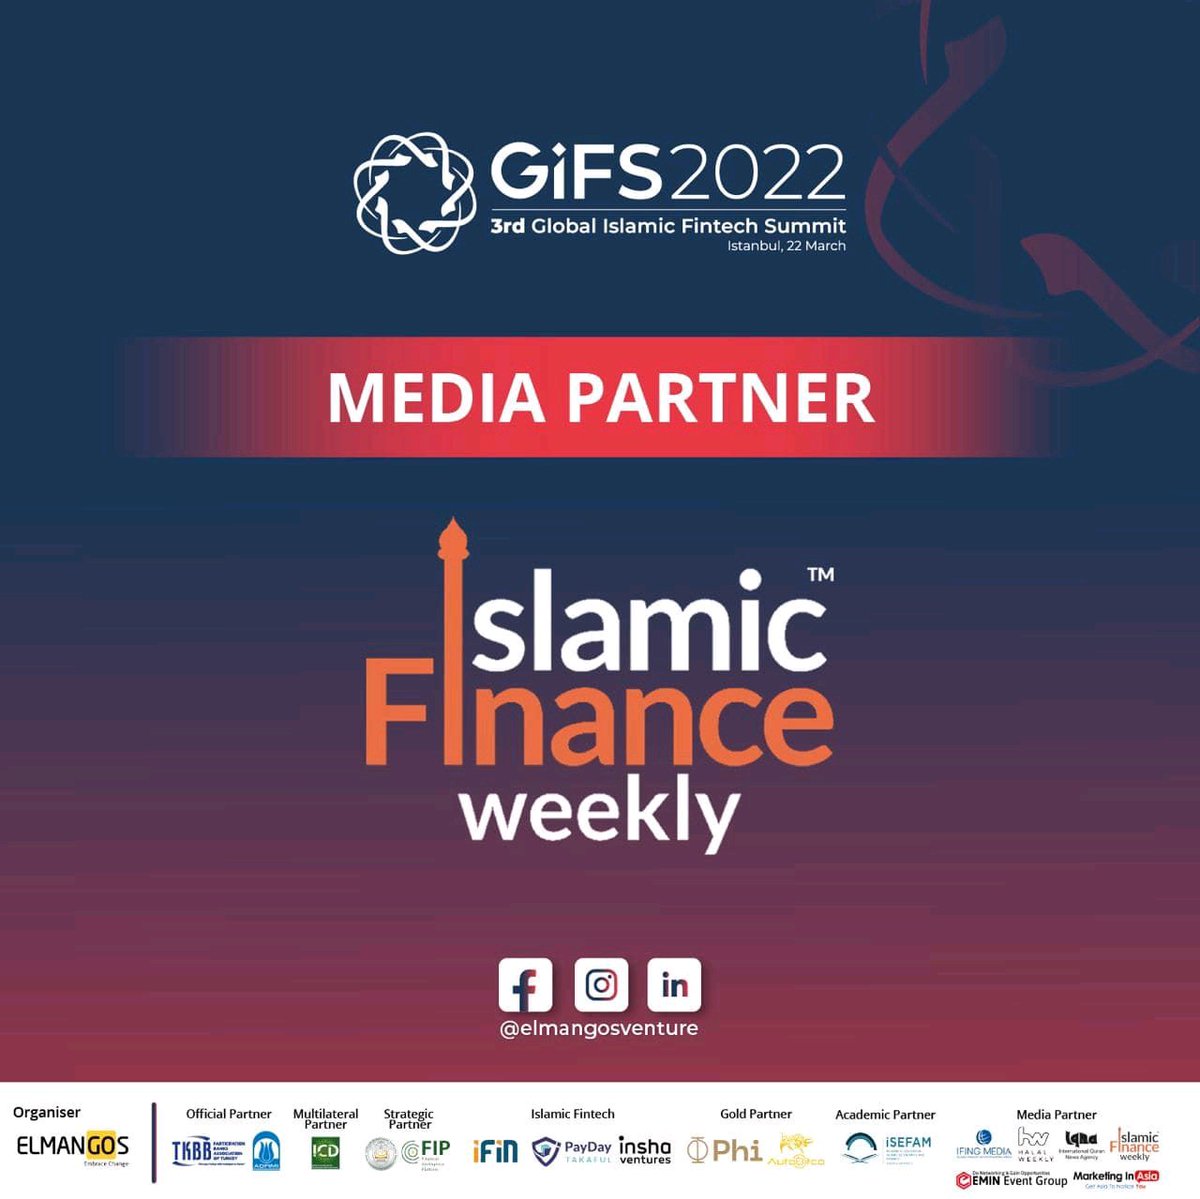 This is to announce that Elmangos Ventures is partnering with @WebTVng  #Islamicfinanceweekly for its 3rd 'Global Islamic Fintech Summit' to hold on March 22-23 in #Instabul, Turkey. 
For more details about the summit, click via: gifs.elmangos.com
#Fintech #Islamicfintech